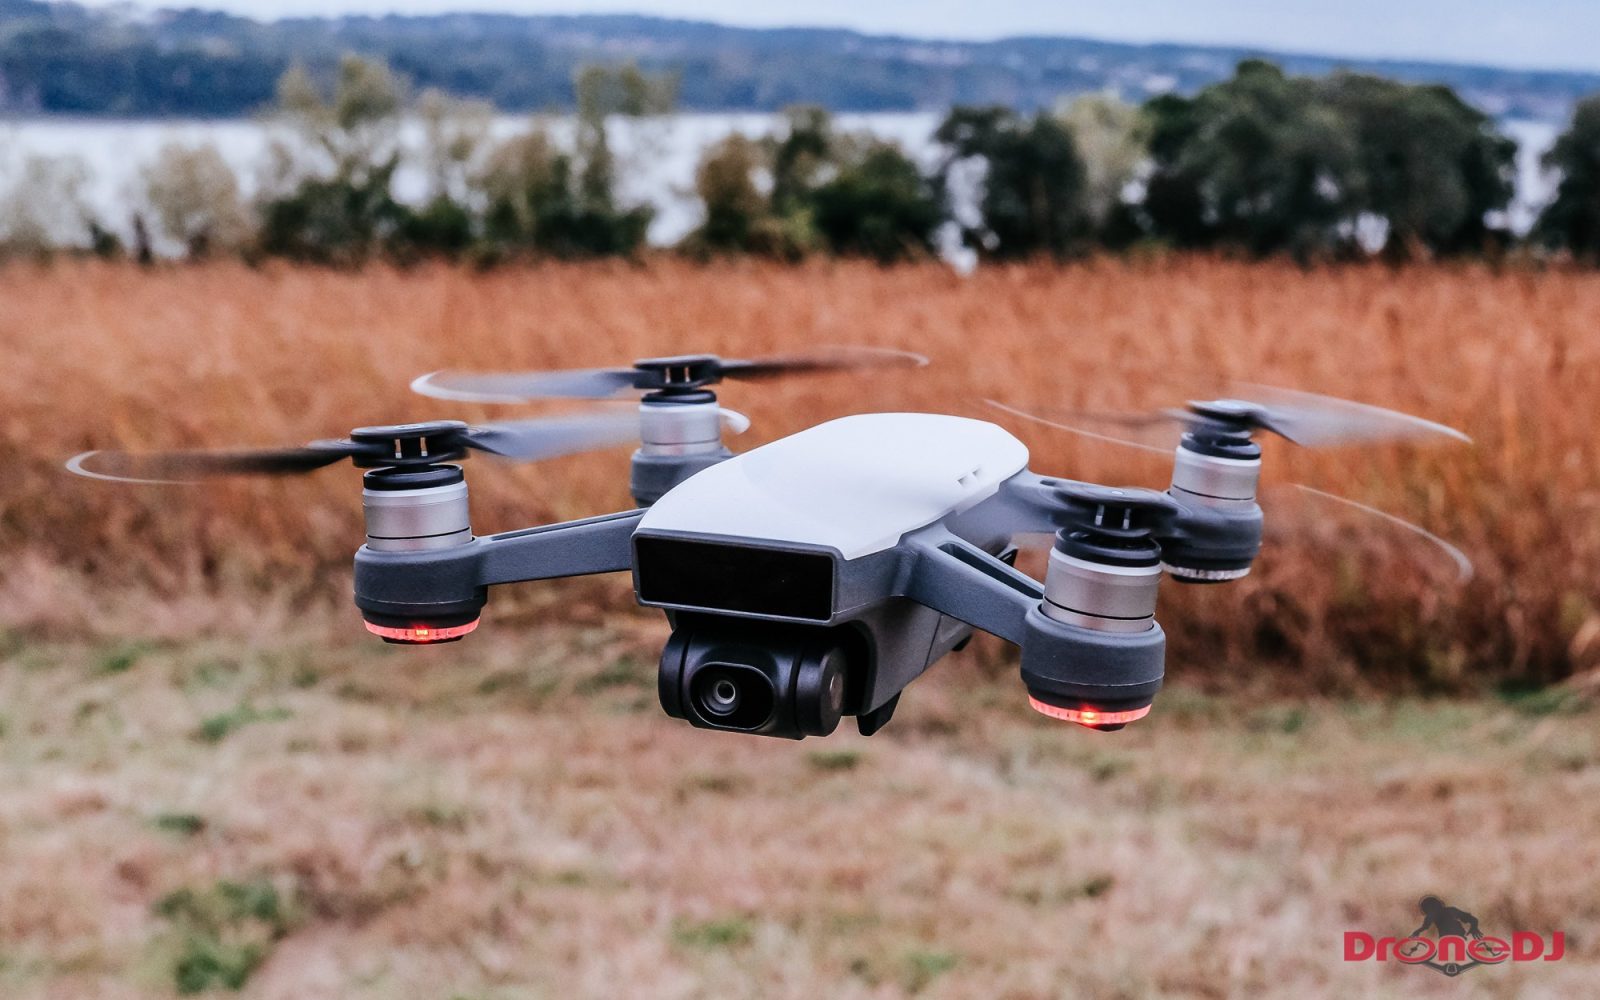 Sydamerika Intrusion forstene Review: The DJI Spark mini-drone packs a punch